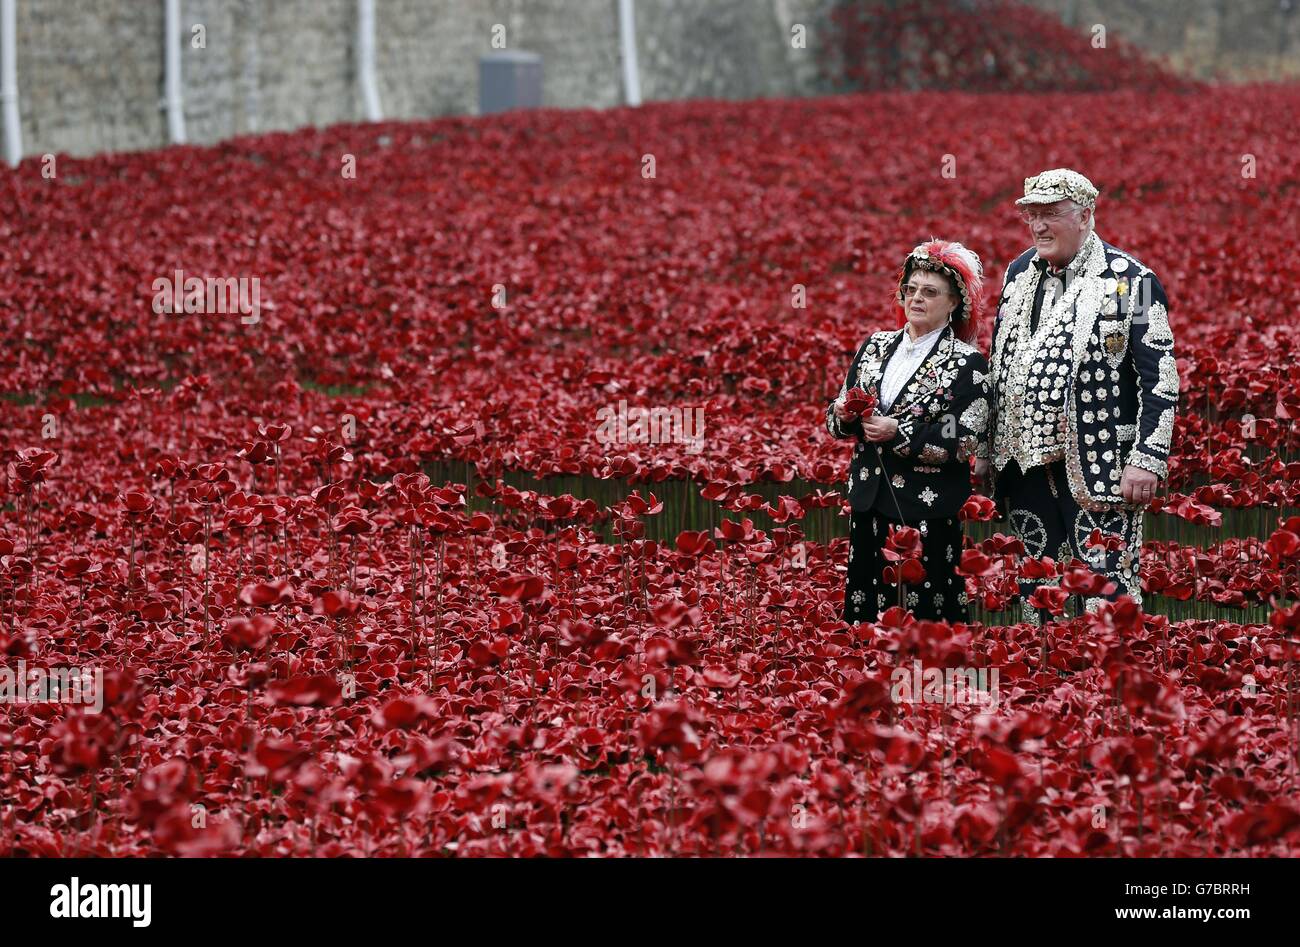 Doreen Golding, Pearly Queen of Bow Bells, and Roy York, Pearly King of Smithfield looking at poppies which form part of the art installation 'Blood Swept Lands and Seas of Red' by artist Paul Cummins at the Tower of London, marking the centenary of World War I. Stock Photo